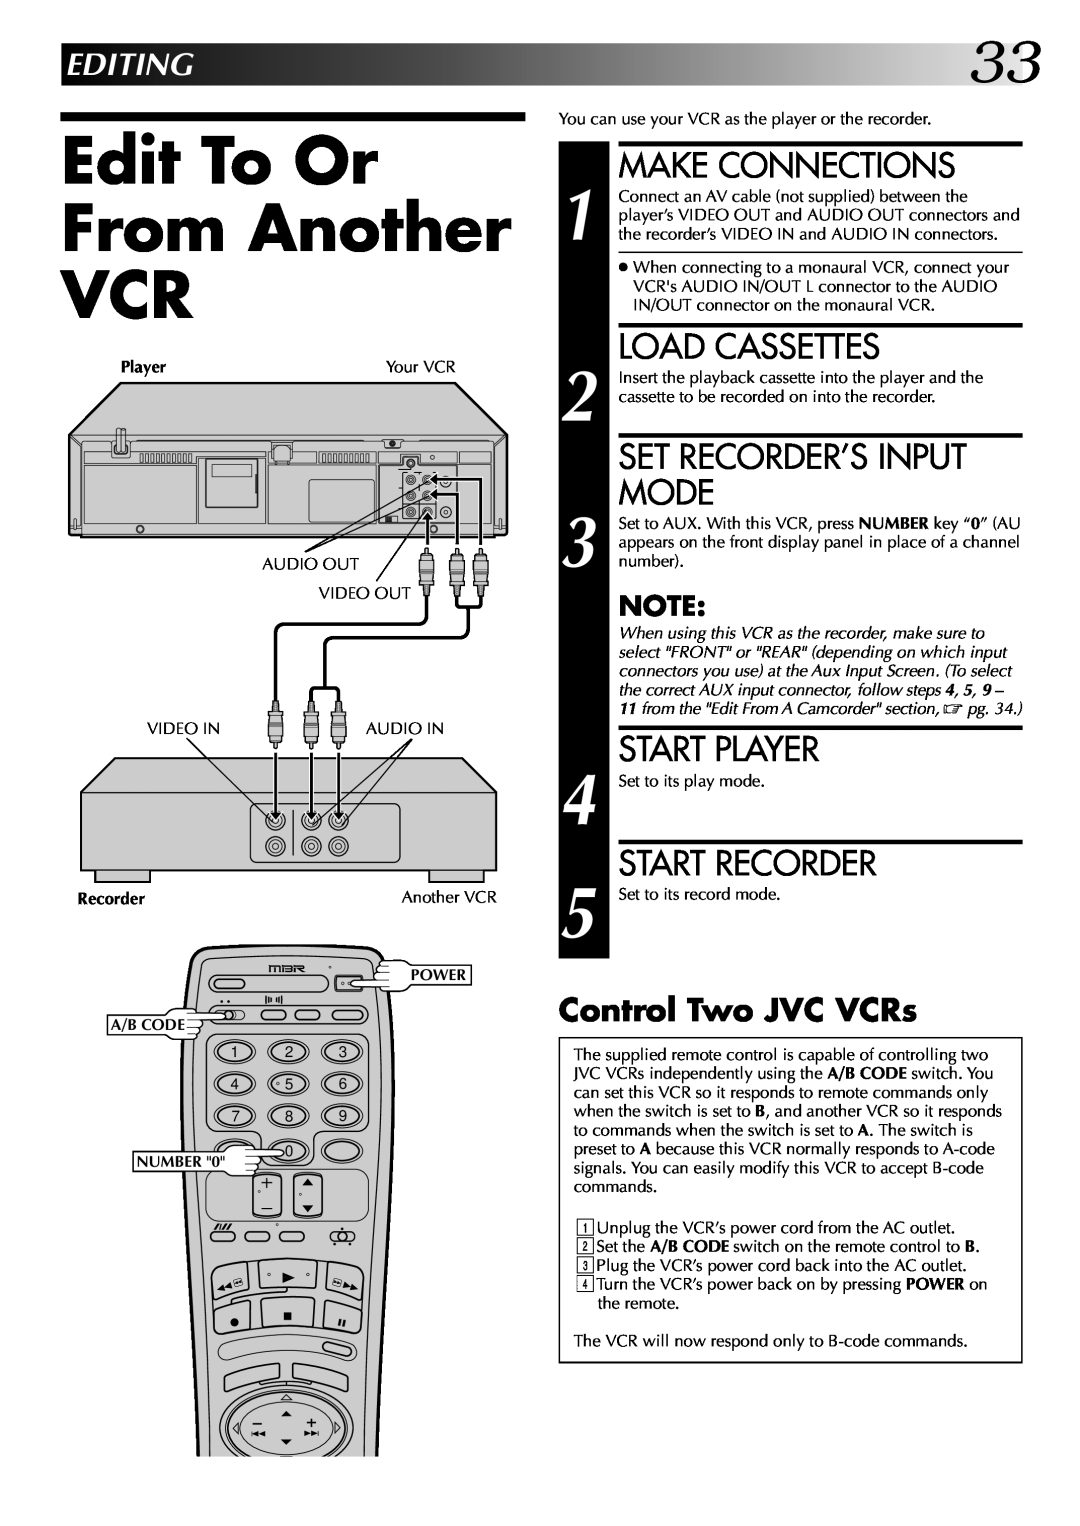 JVC HR-J7004UM Edit To Or From Another VCR, Make Connections, Load Cassettes, Set Recorder’S Input Mode, Start Player 